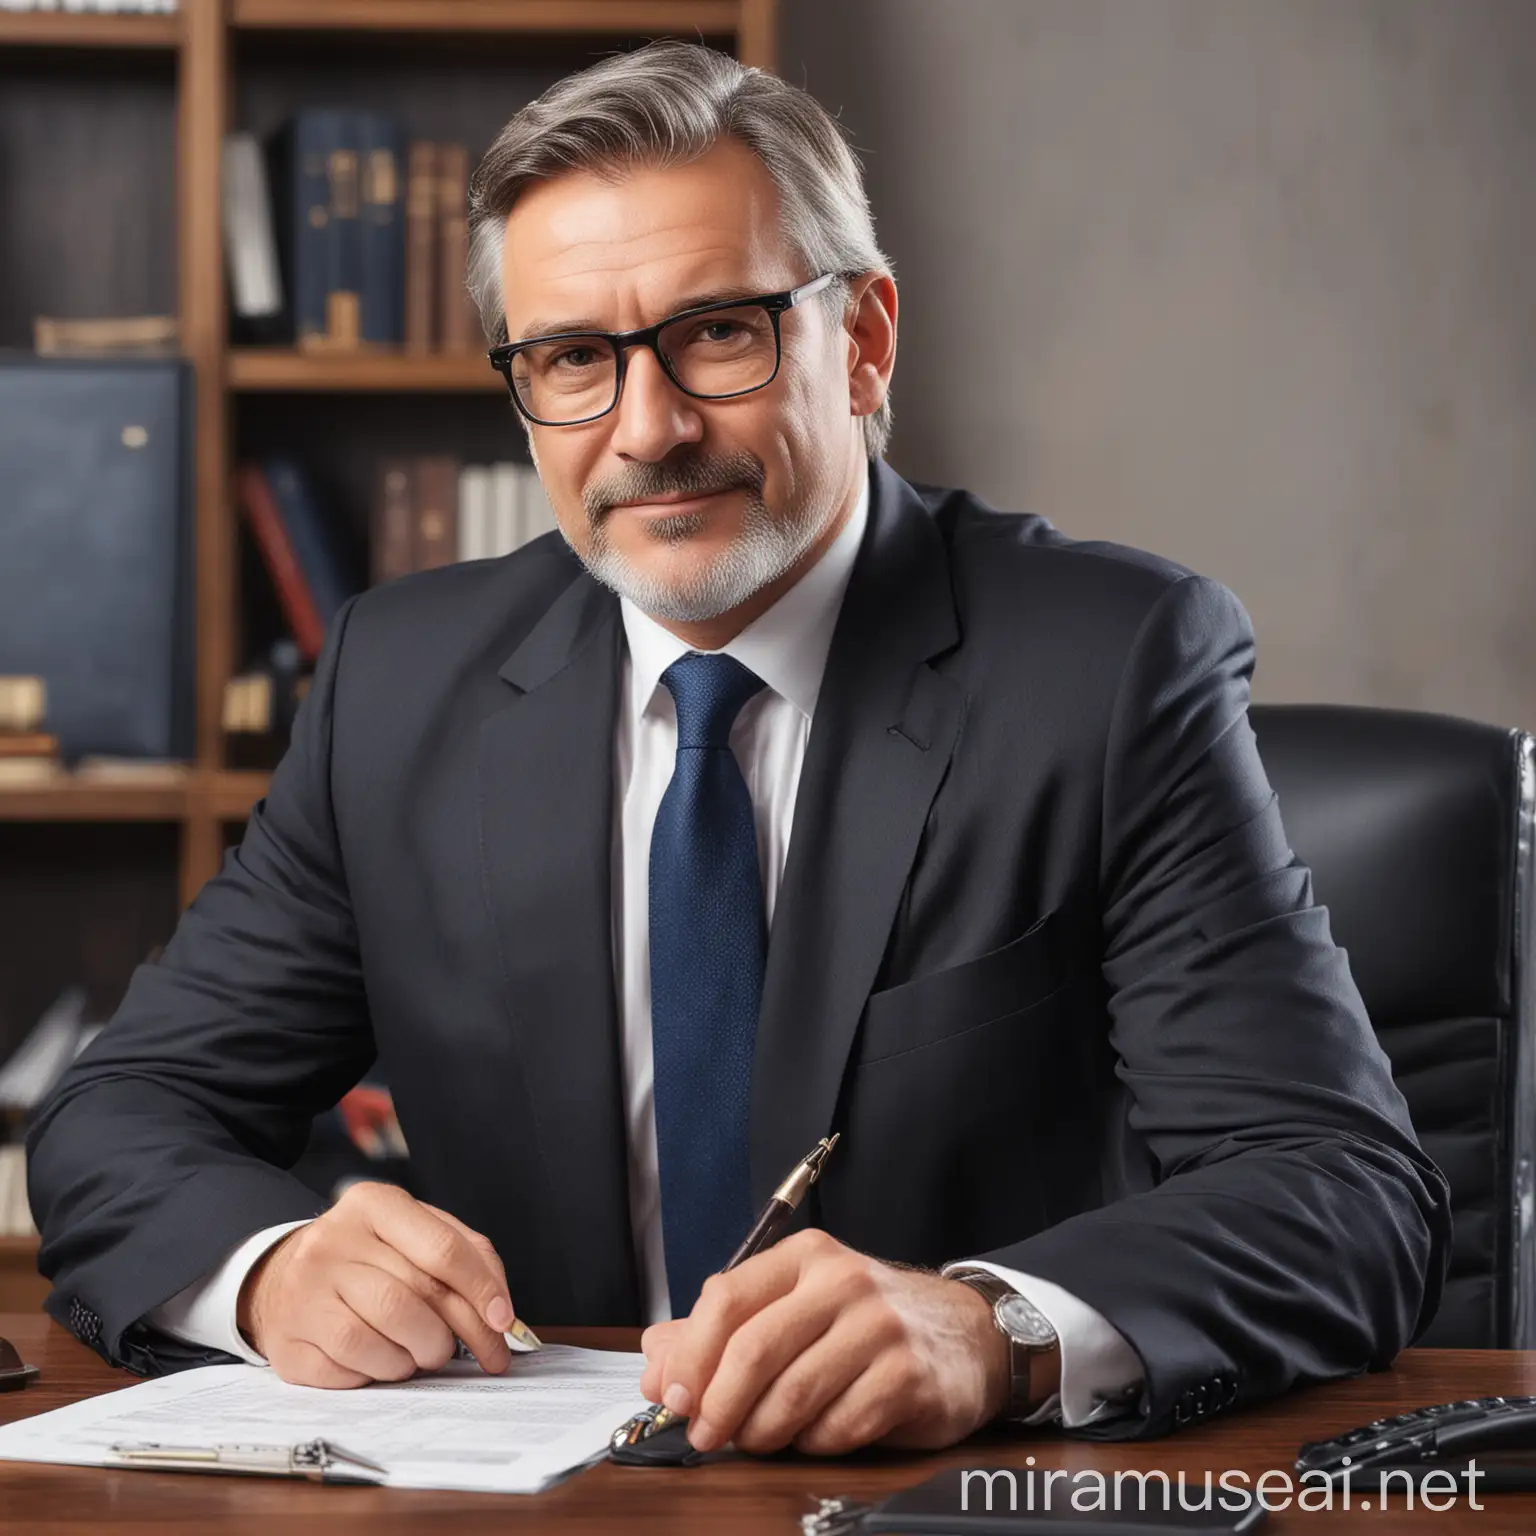 MiddleAged Successful Lawyer Working at Desk in Office